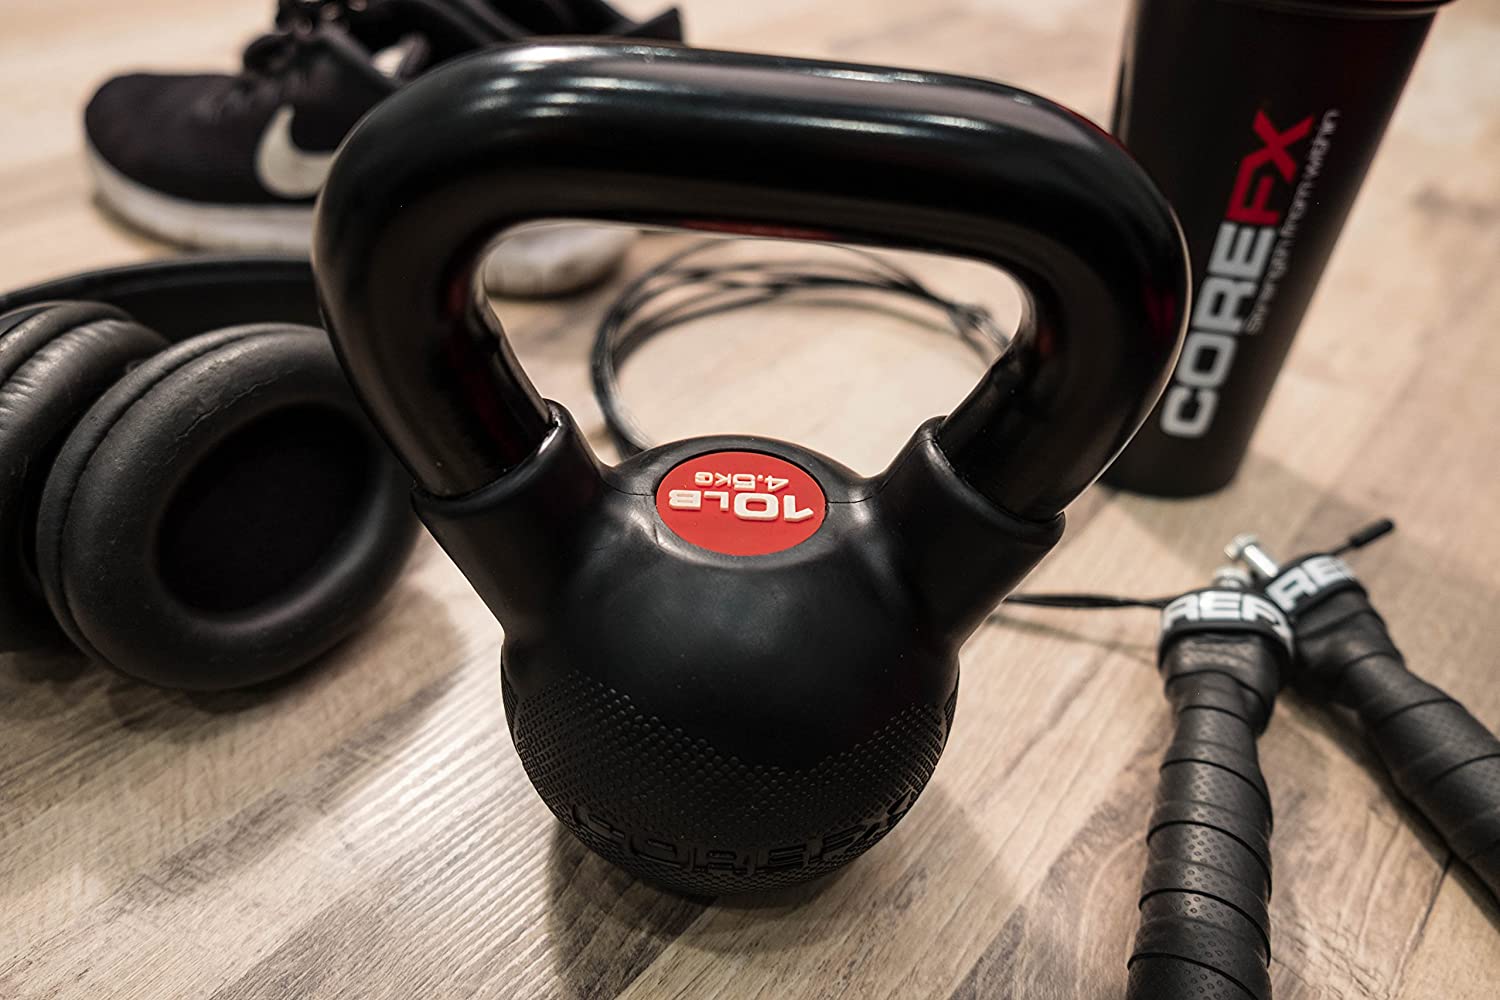 Kettlebells & Clubs – AKFIT Fitness Specialty Store